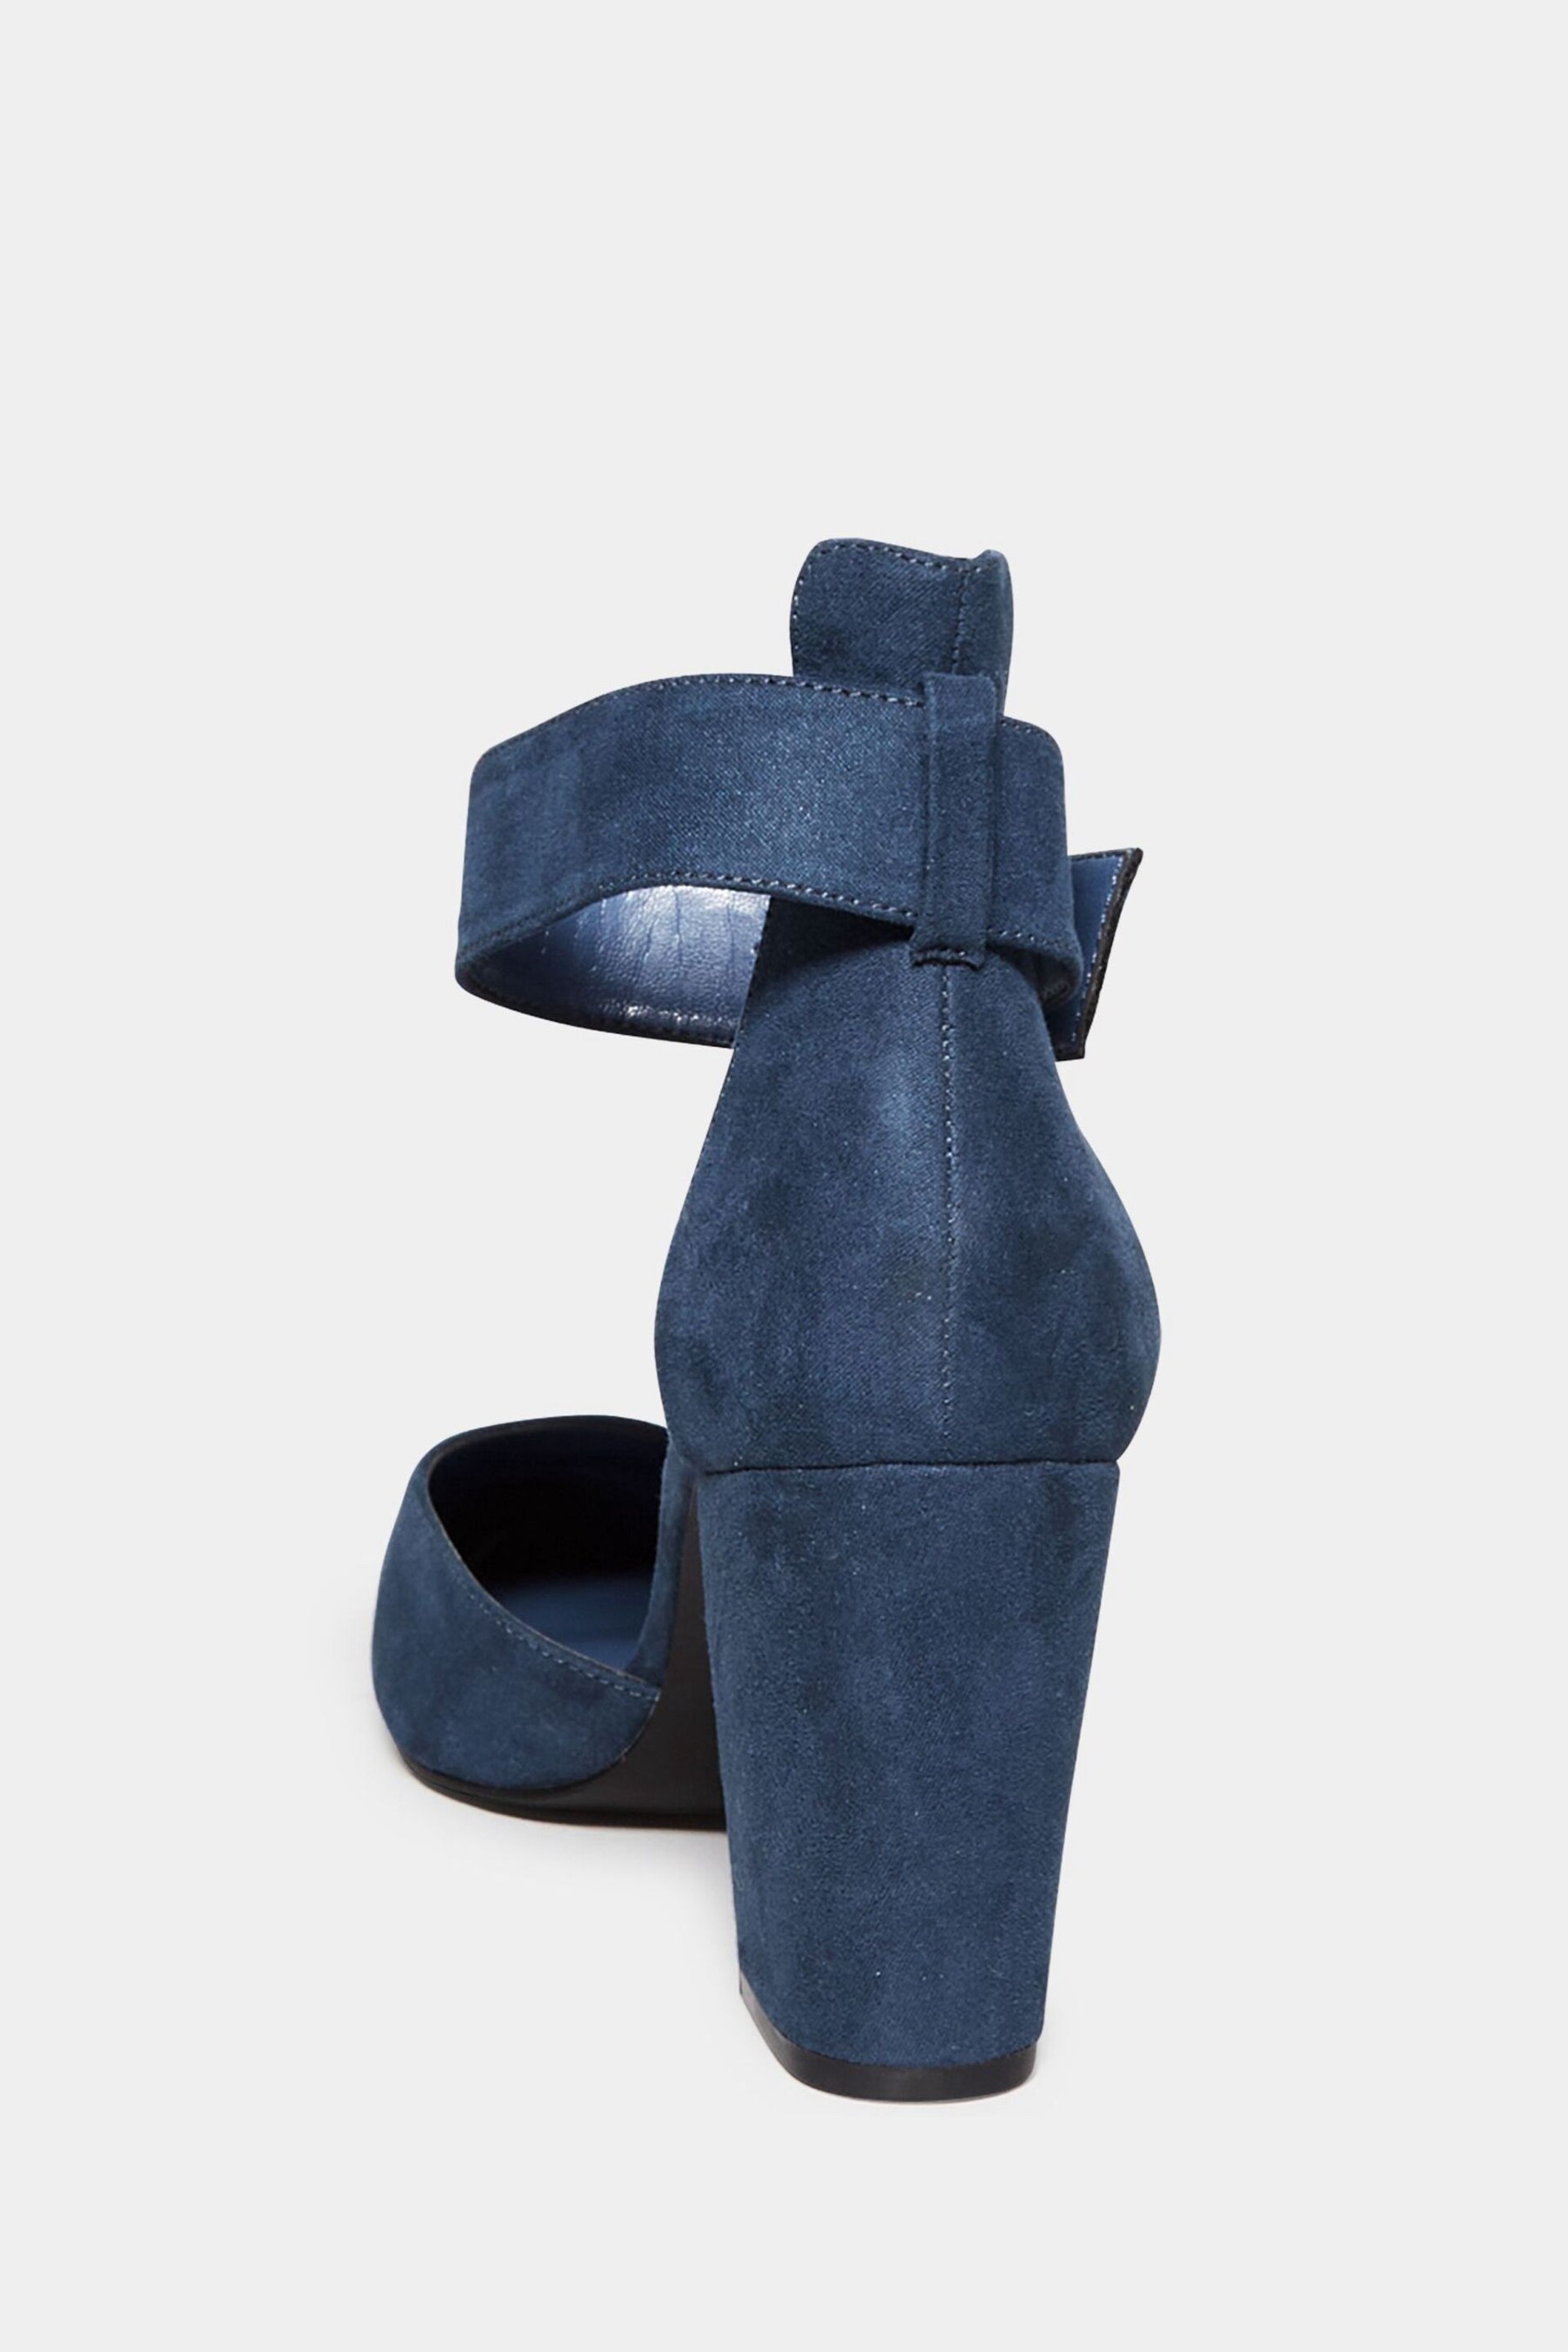 Long Tall Sally Blue Pointed Court Heels - Image 3 of 4